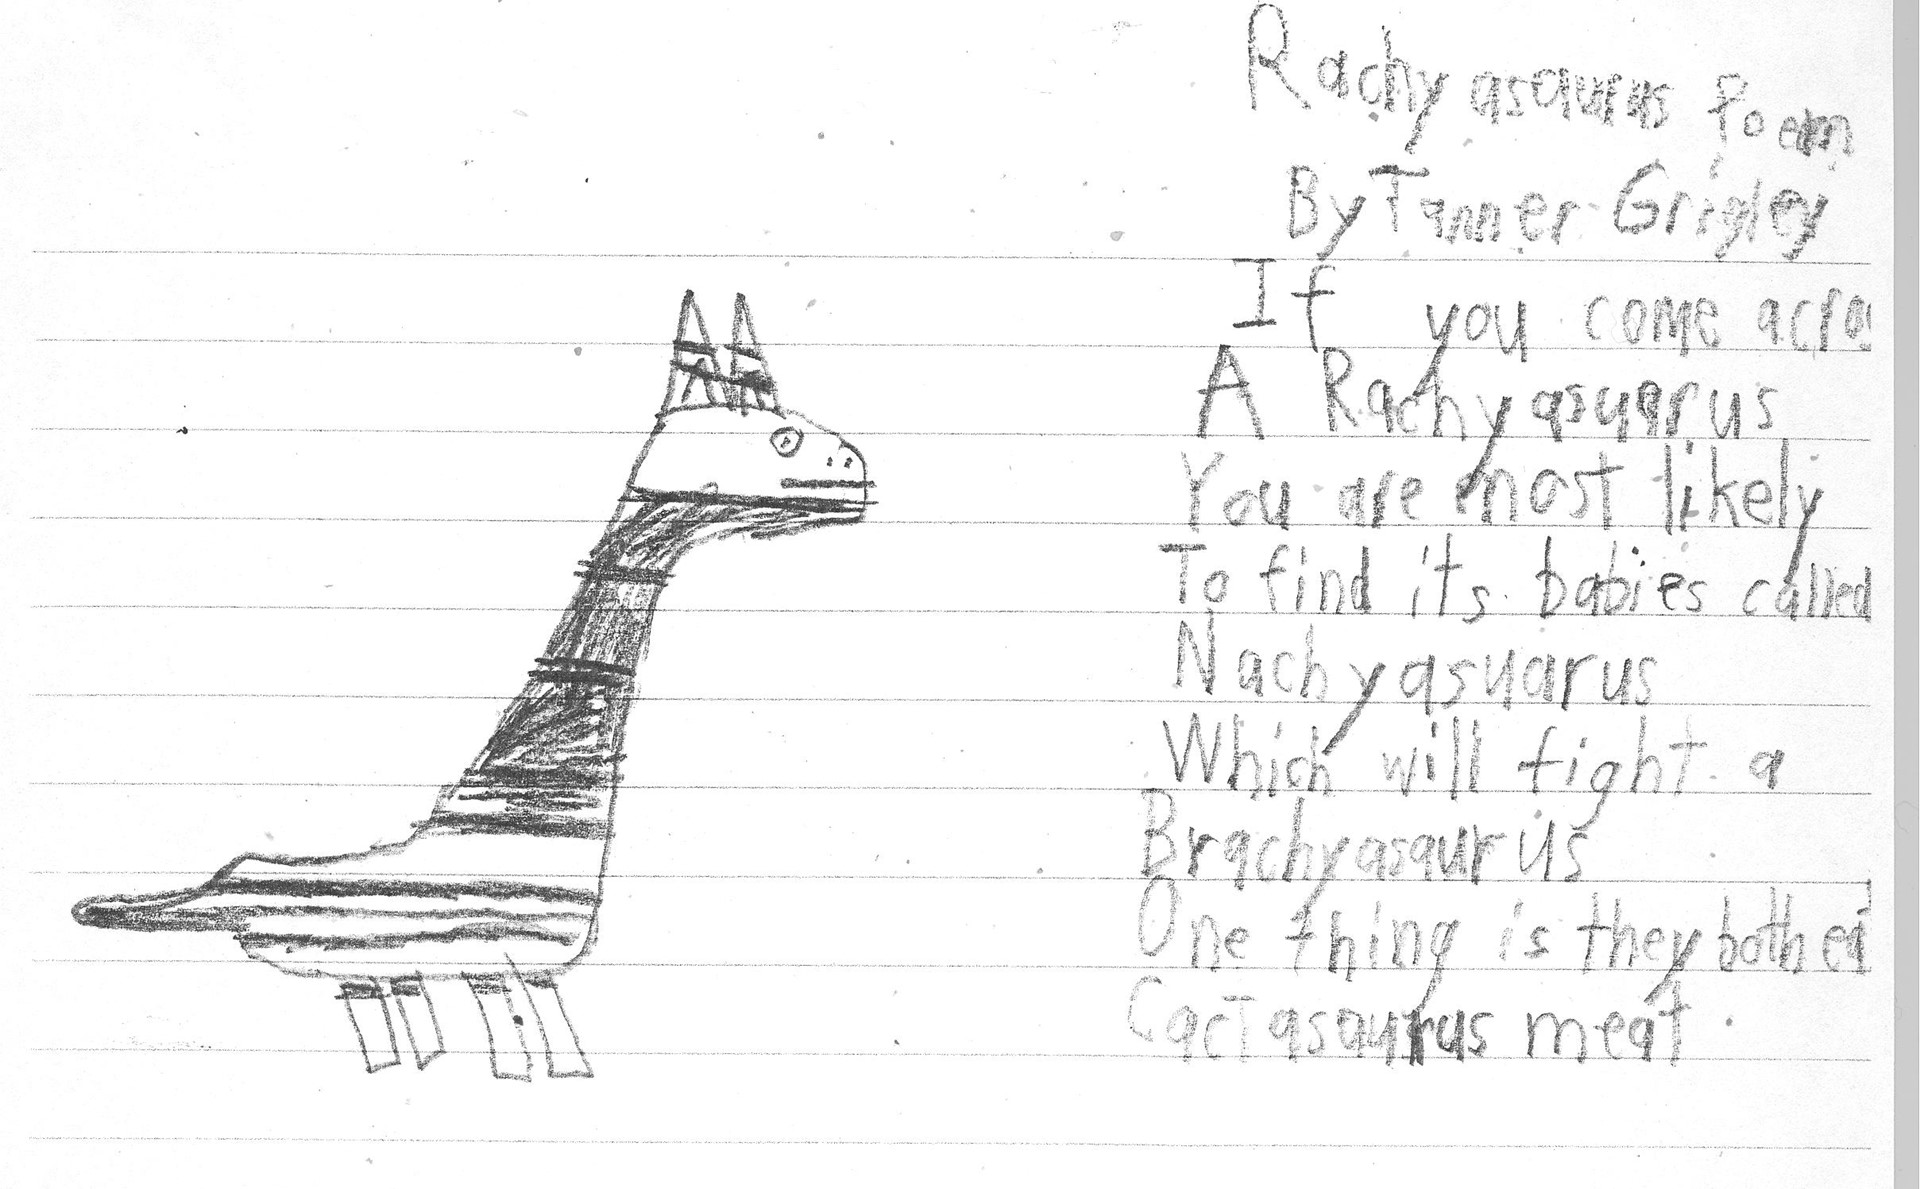 Poems about and illustrations of imaginary animals.